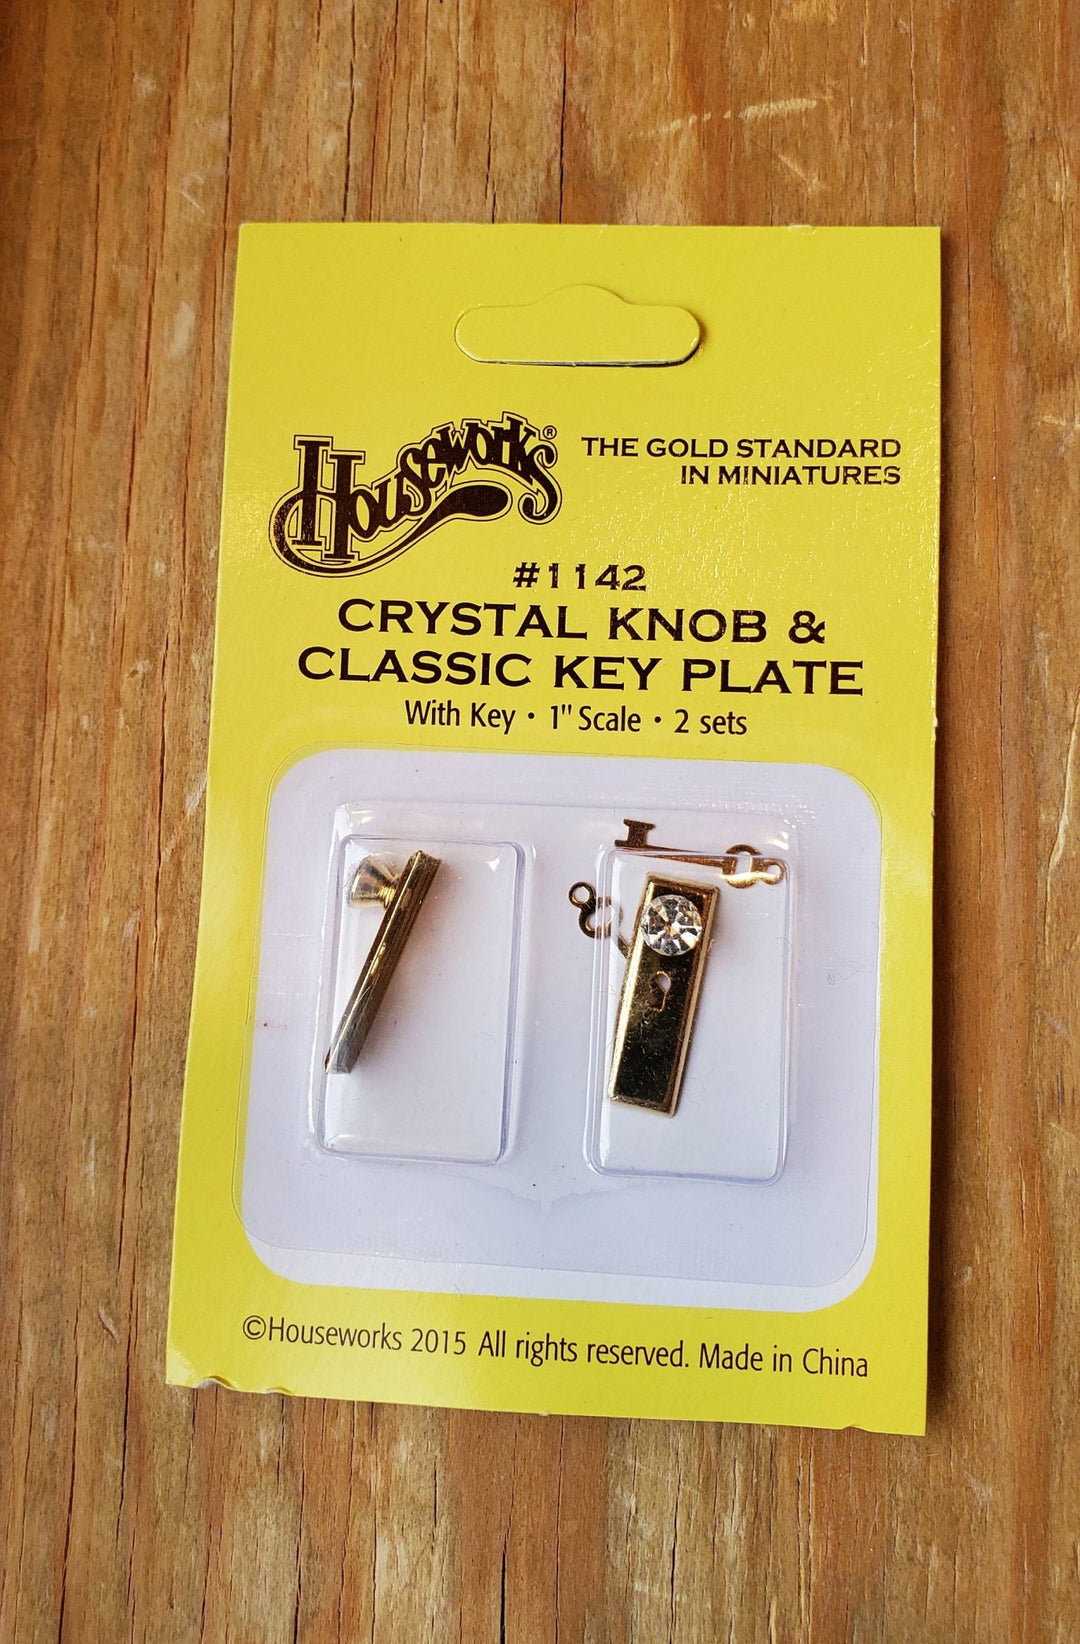 Dollhouse Miniature Door Knobs Handles Gold with Crystal Knobs & Keyhole 1:12 Scale - Miniature Crush